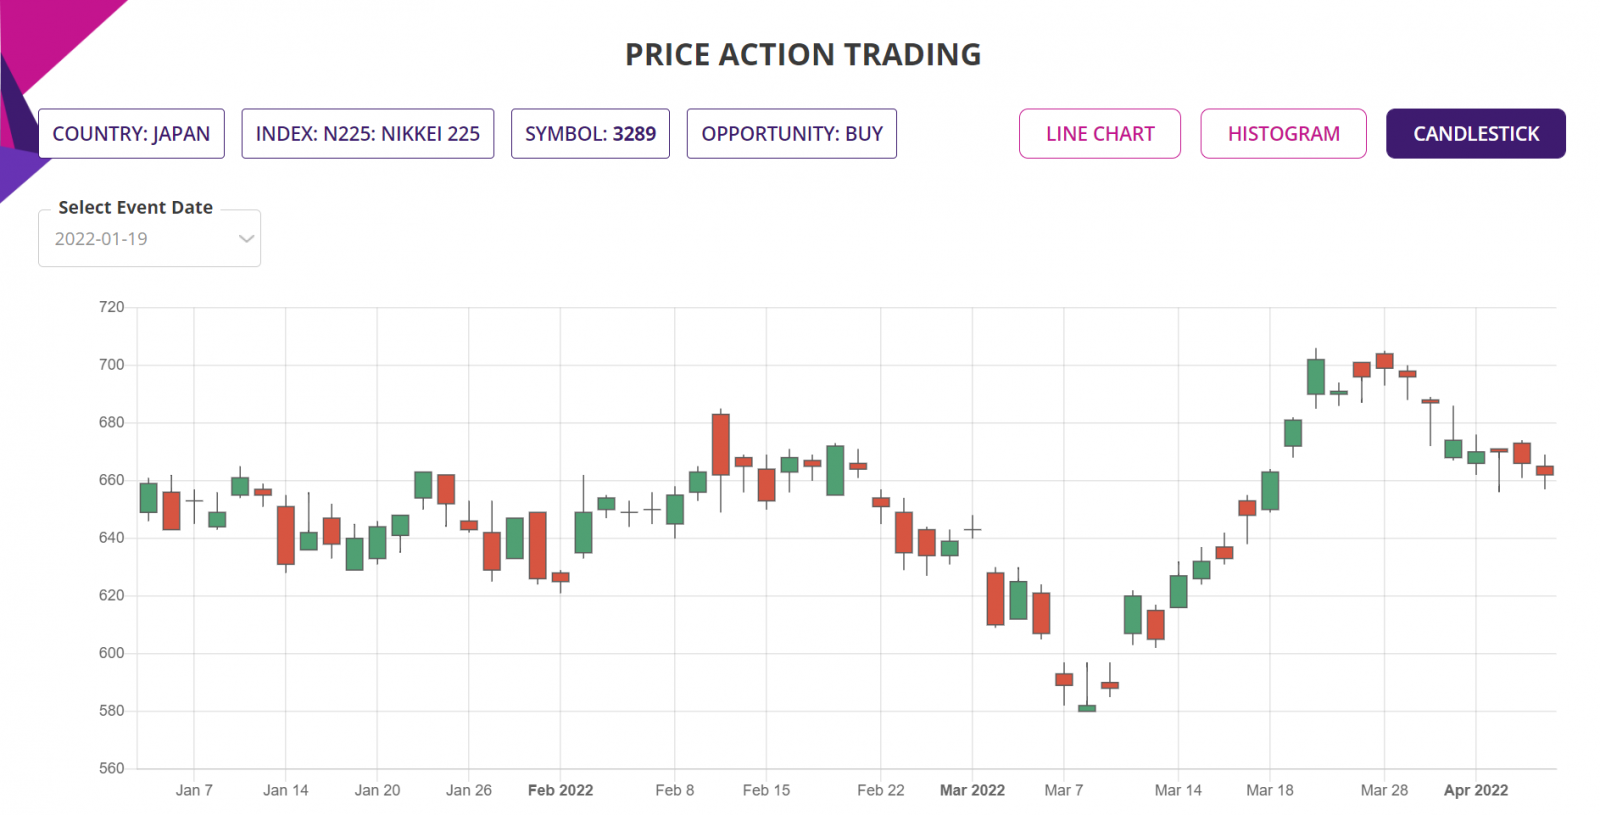 Price action trading candlestick chart